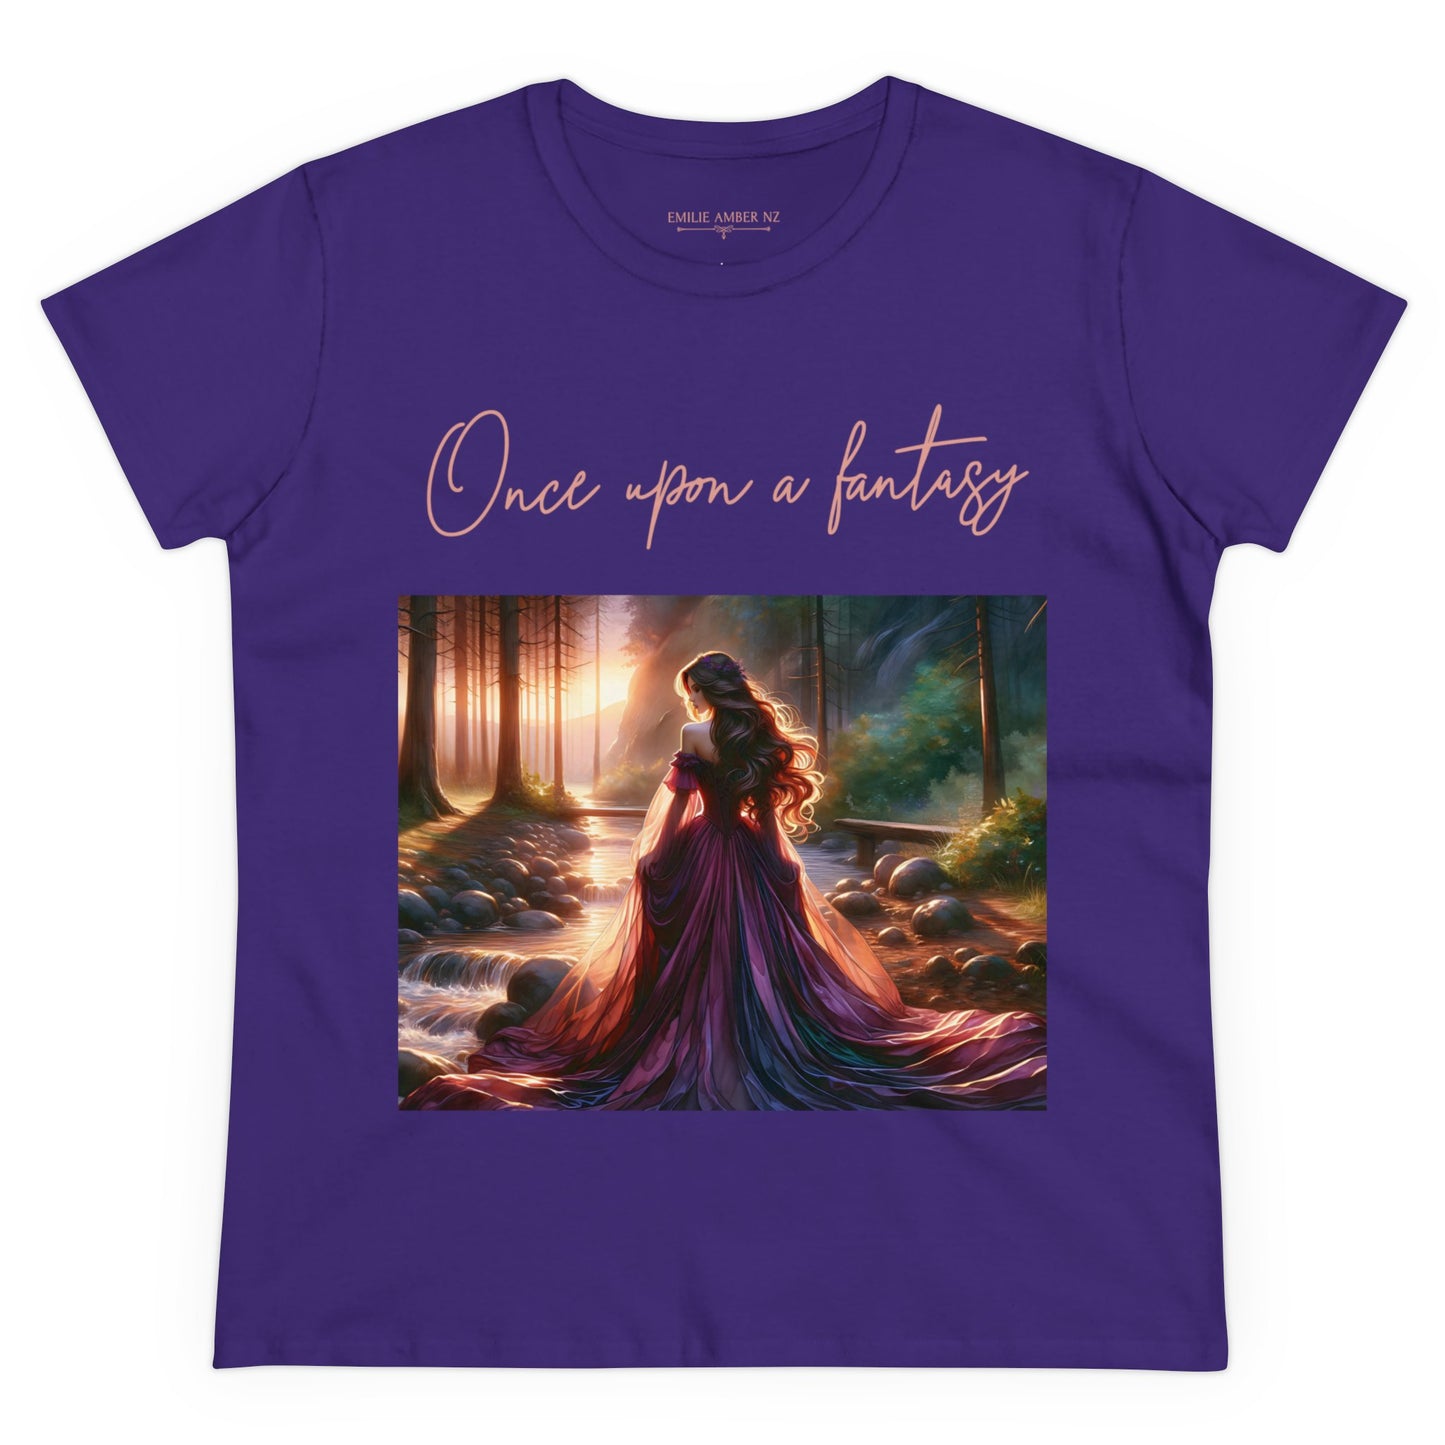 Once Upon A Fantasy - River Maiden Woman's Cotton T-Shirt